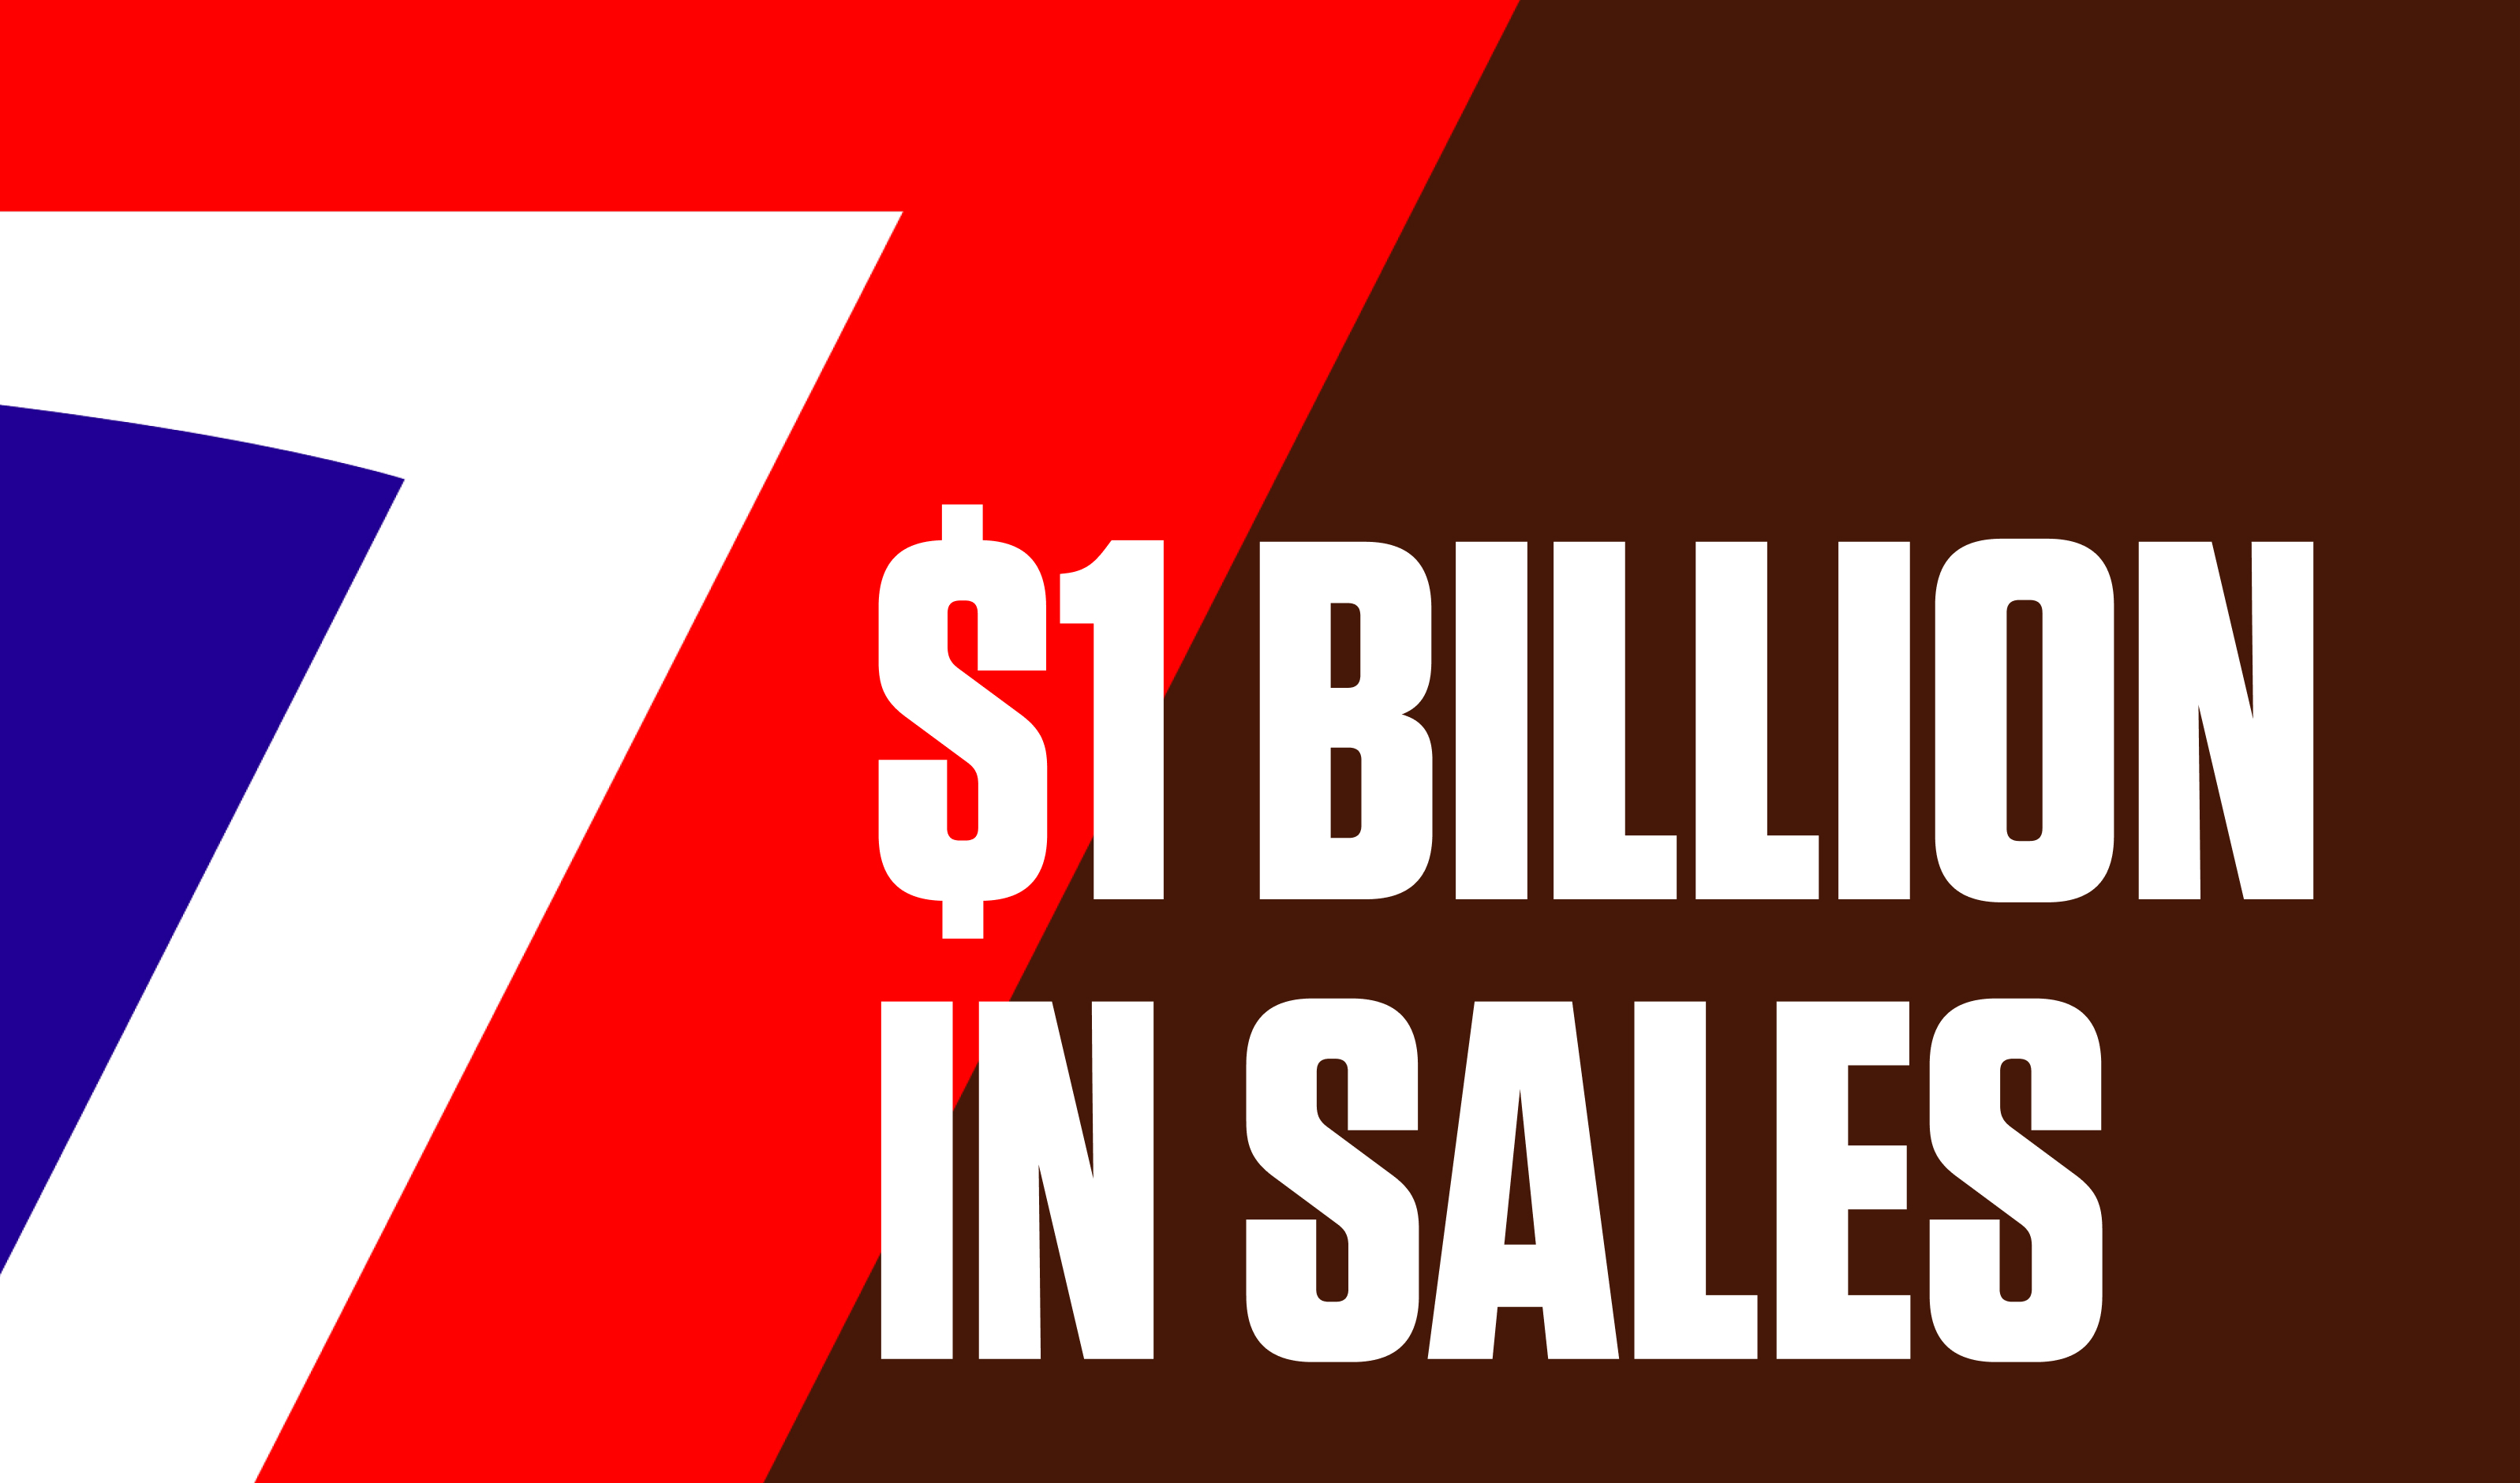 Bold white text of "$1 Billion in sales" over colored background